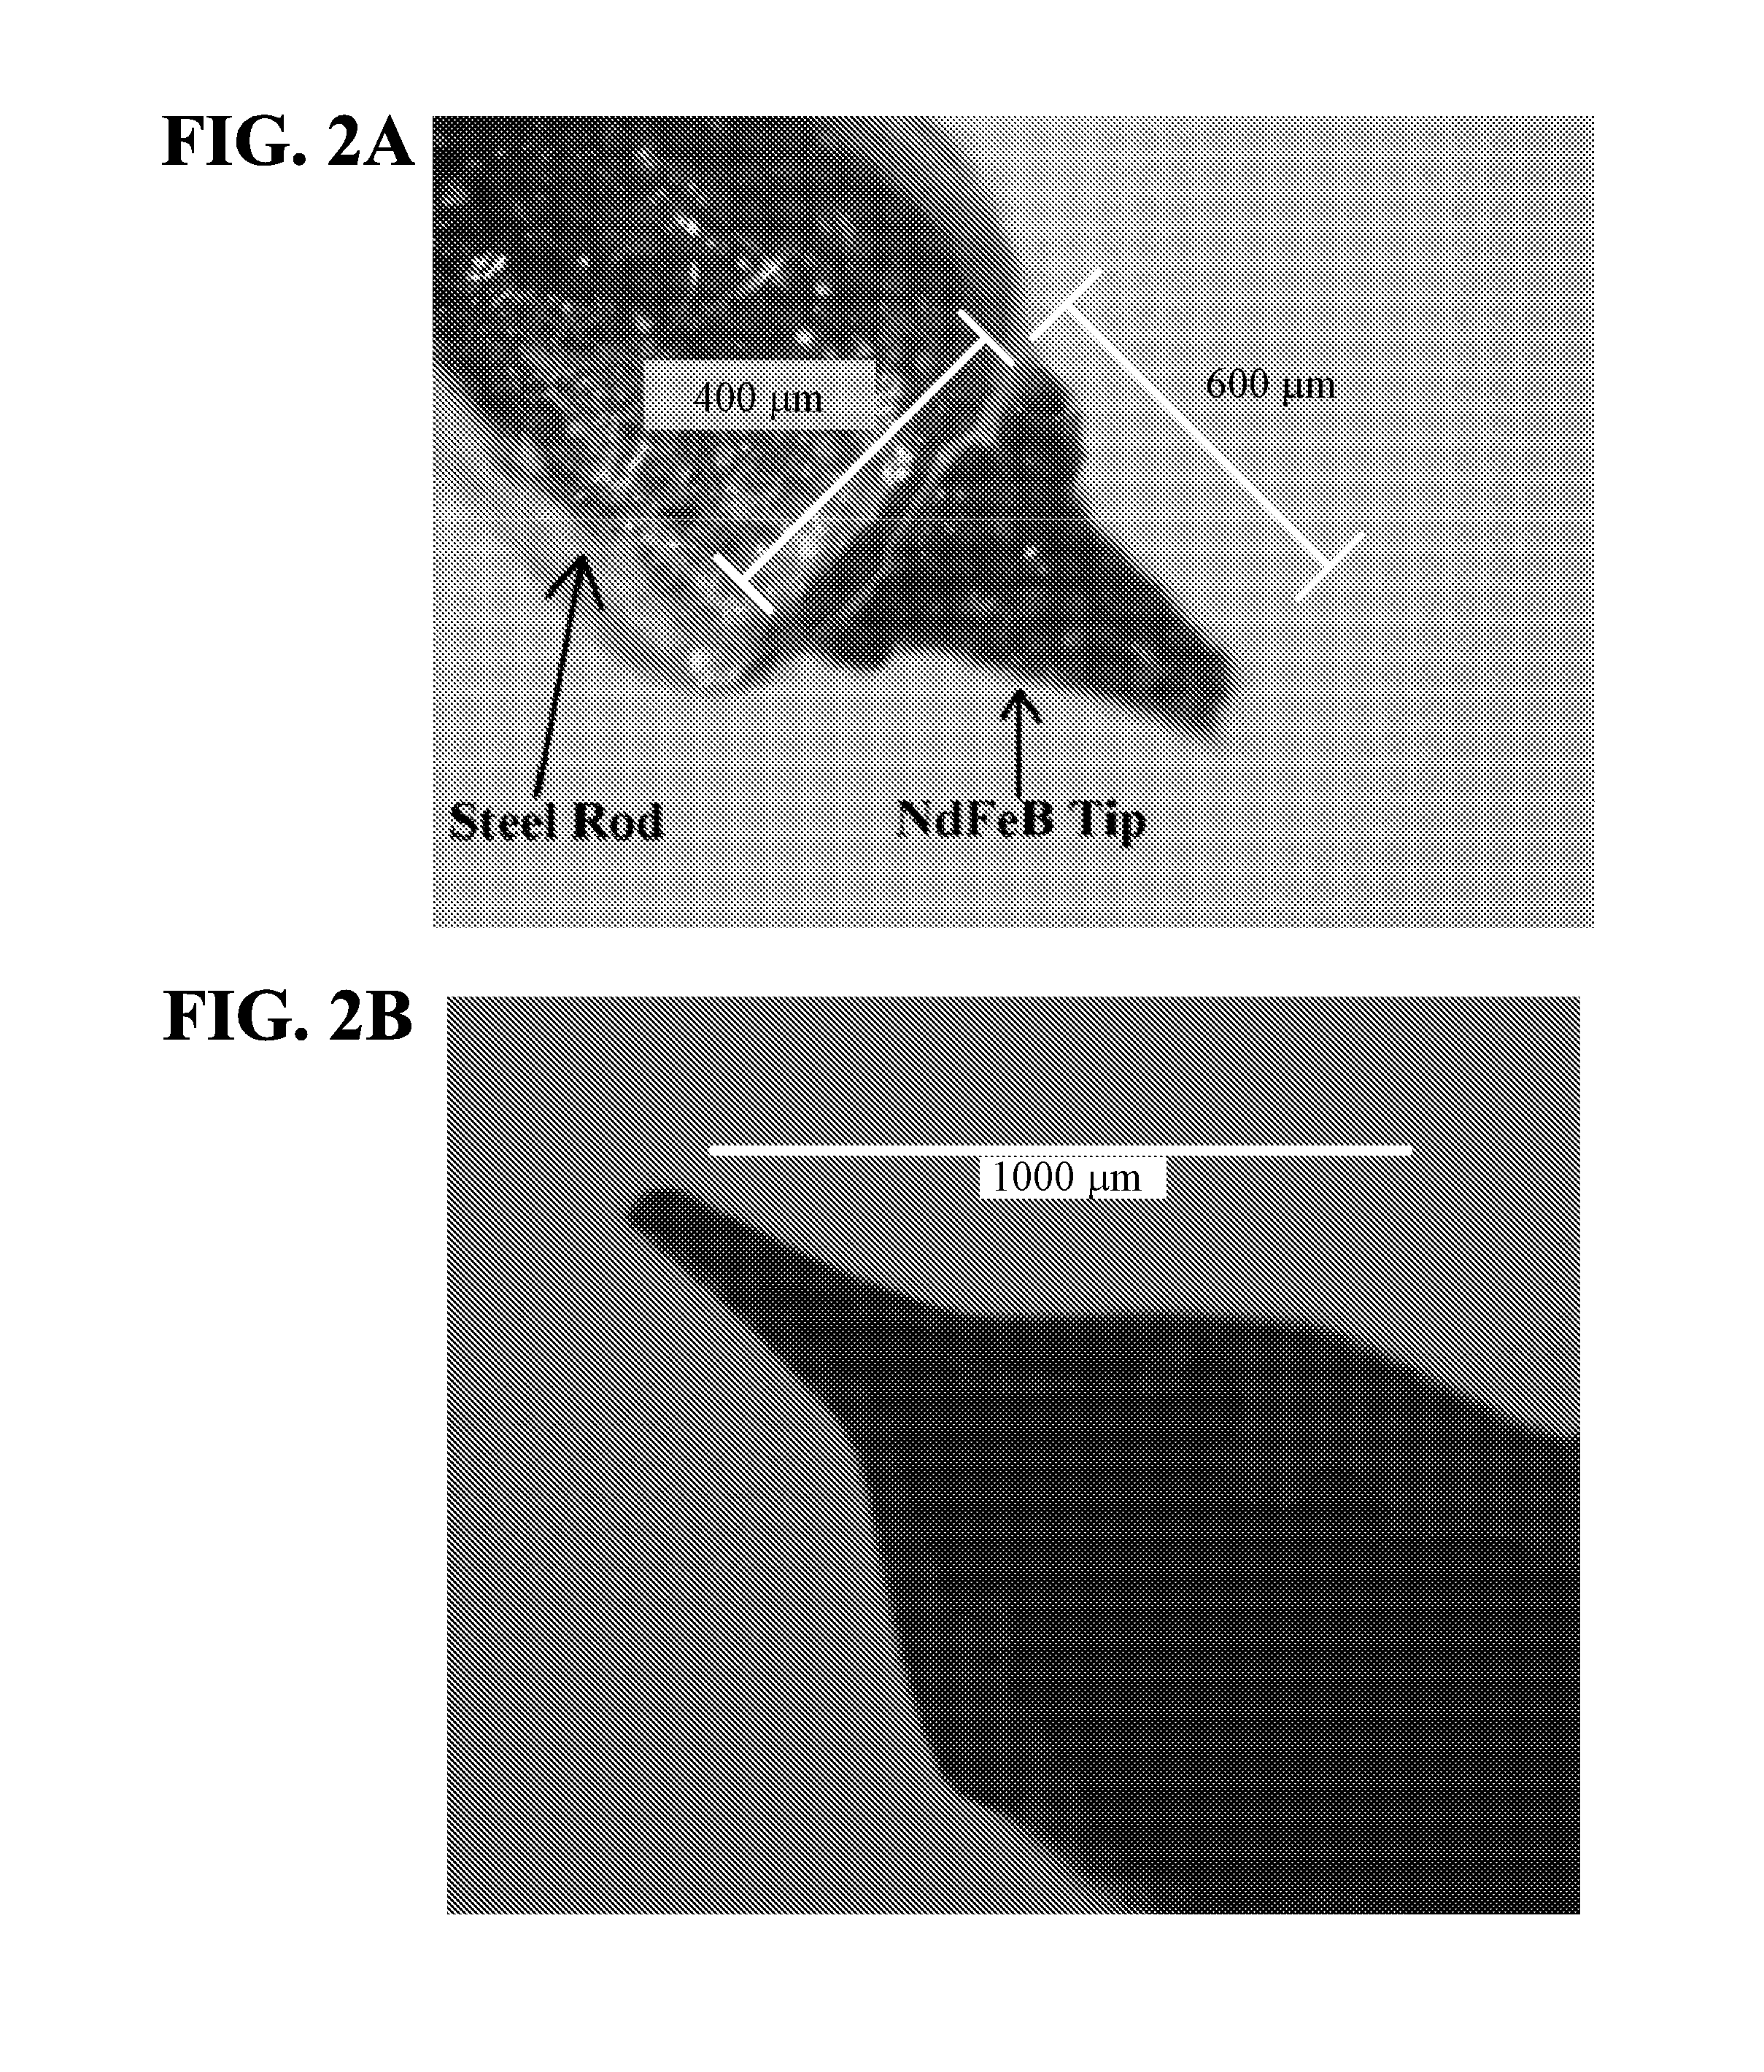 Magnetic apparatus and methods of use